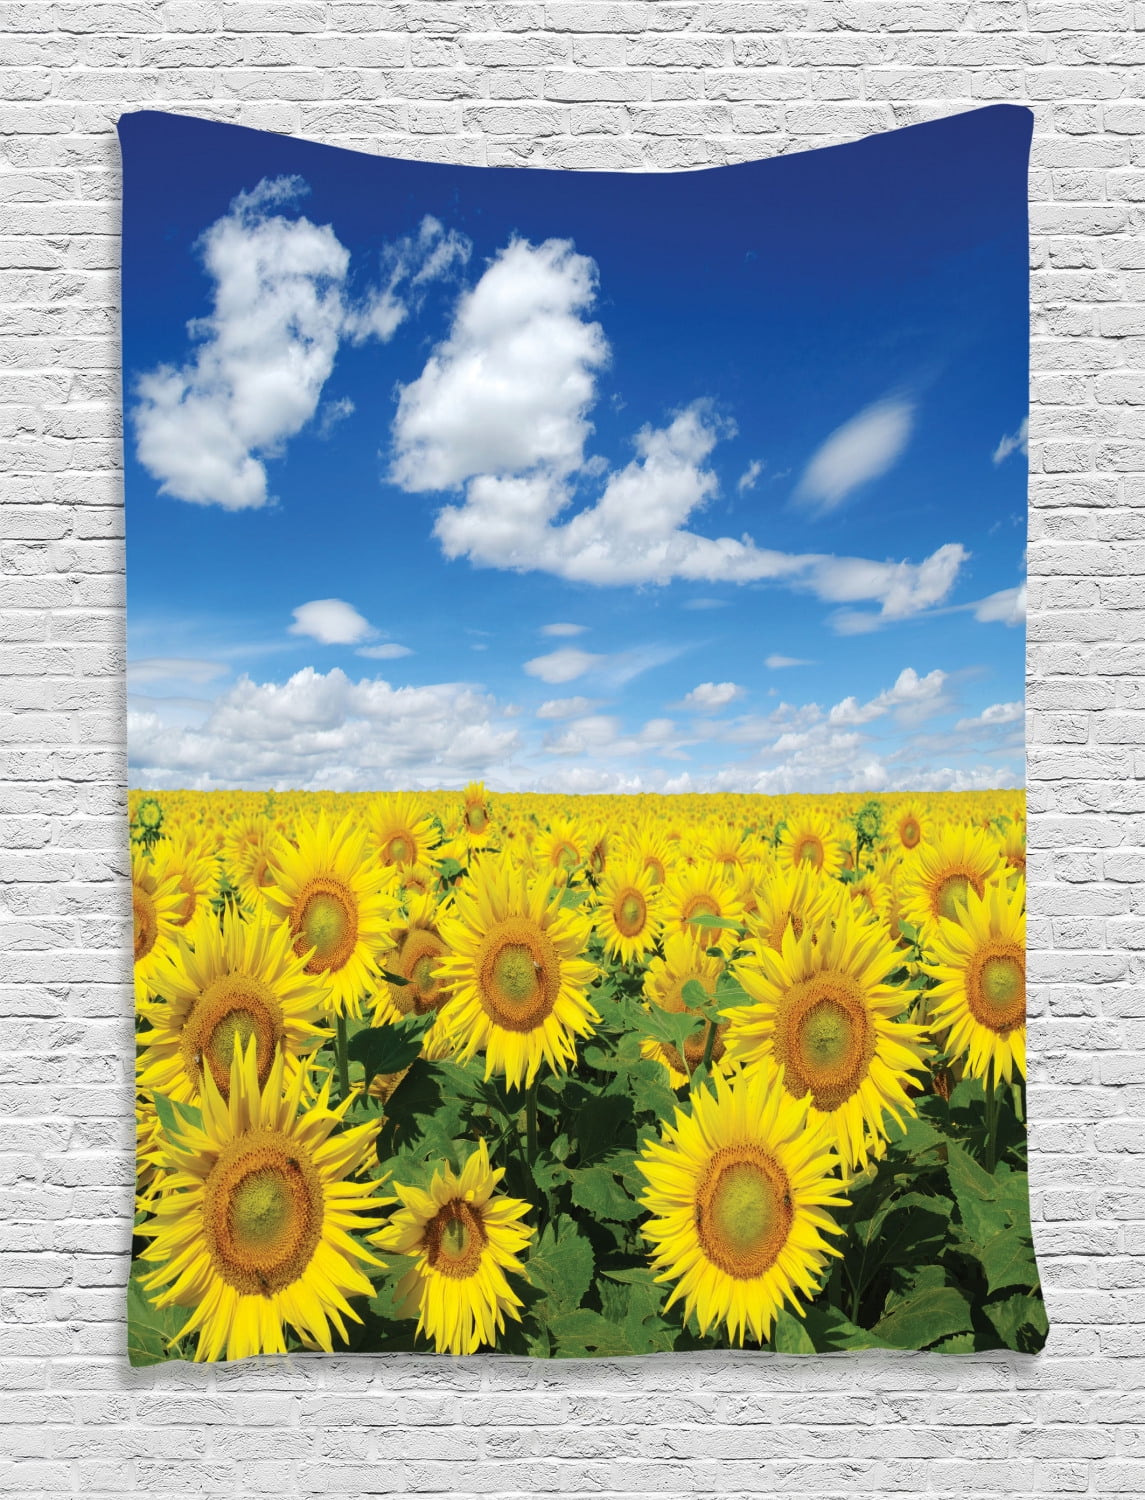 Sunflower Decor Wall Hanging Tapestry Fresh Sunflowers Field Under Bright Sky Clouds Countryside Farm Picture Print Bedroom Living Room Dorm